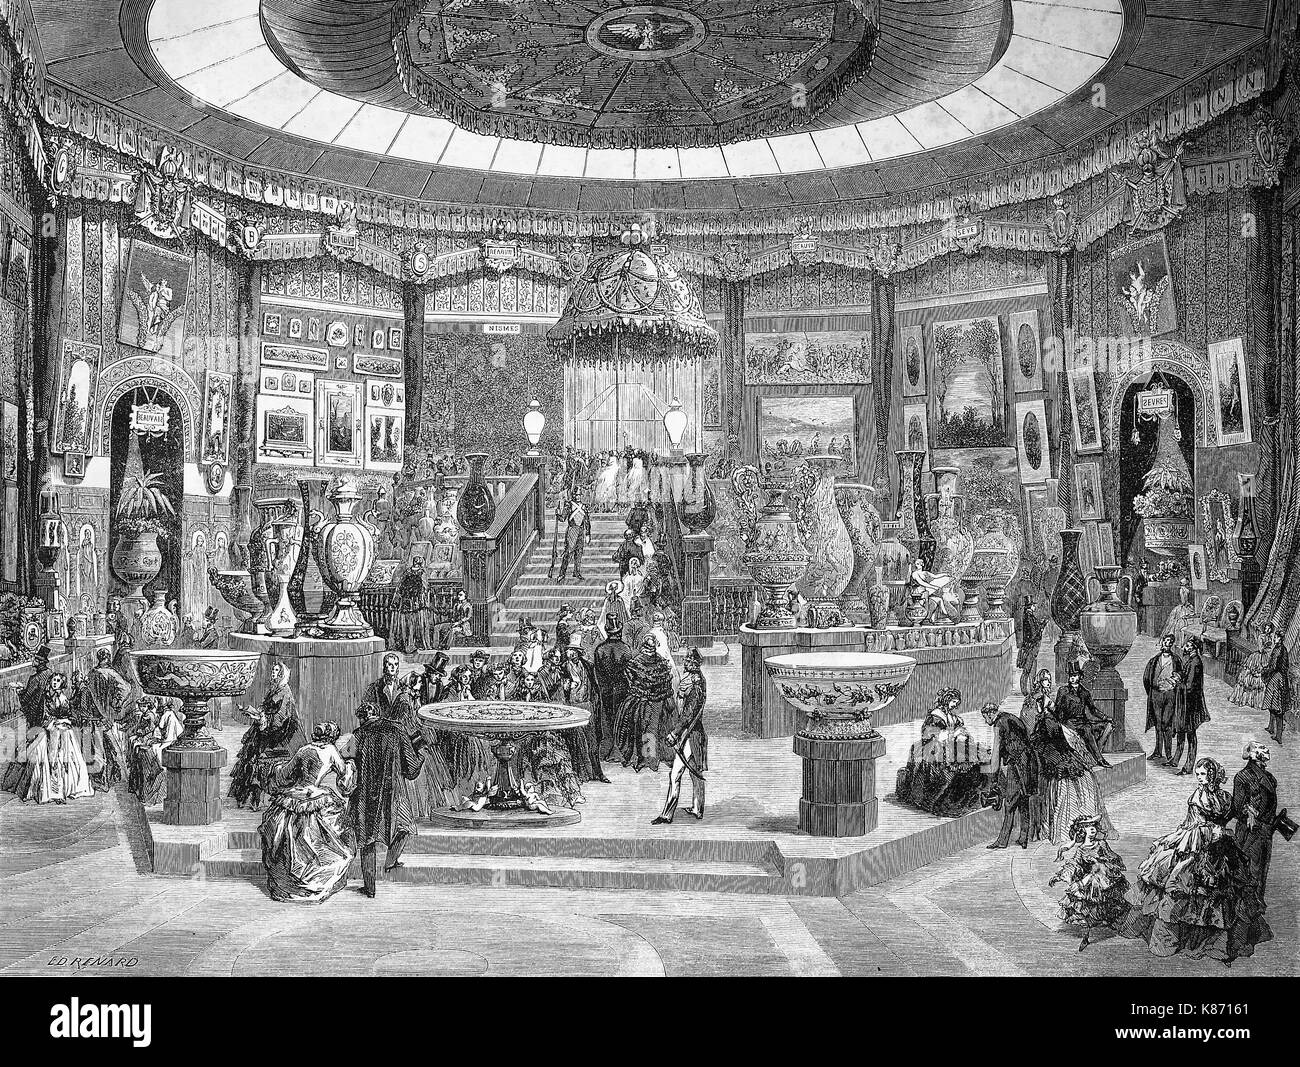 the international exposition 1867, Paris, France, the exhicition of the manufacture royale de porcelaine de Sevres, Digital improved reproduction of an original woodprint from the 19th century Stock Photo